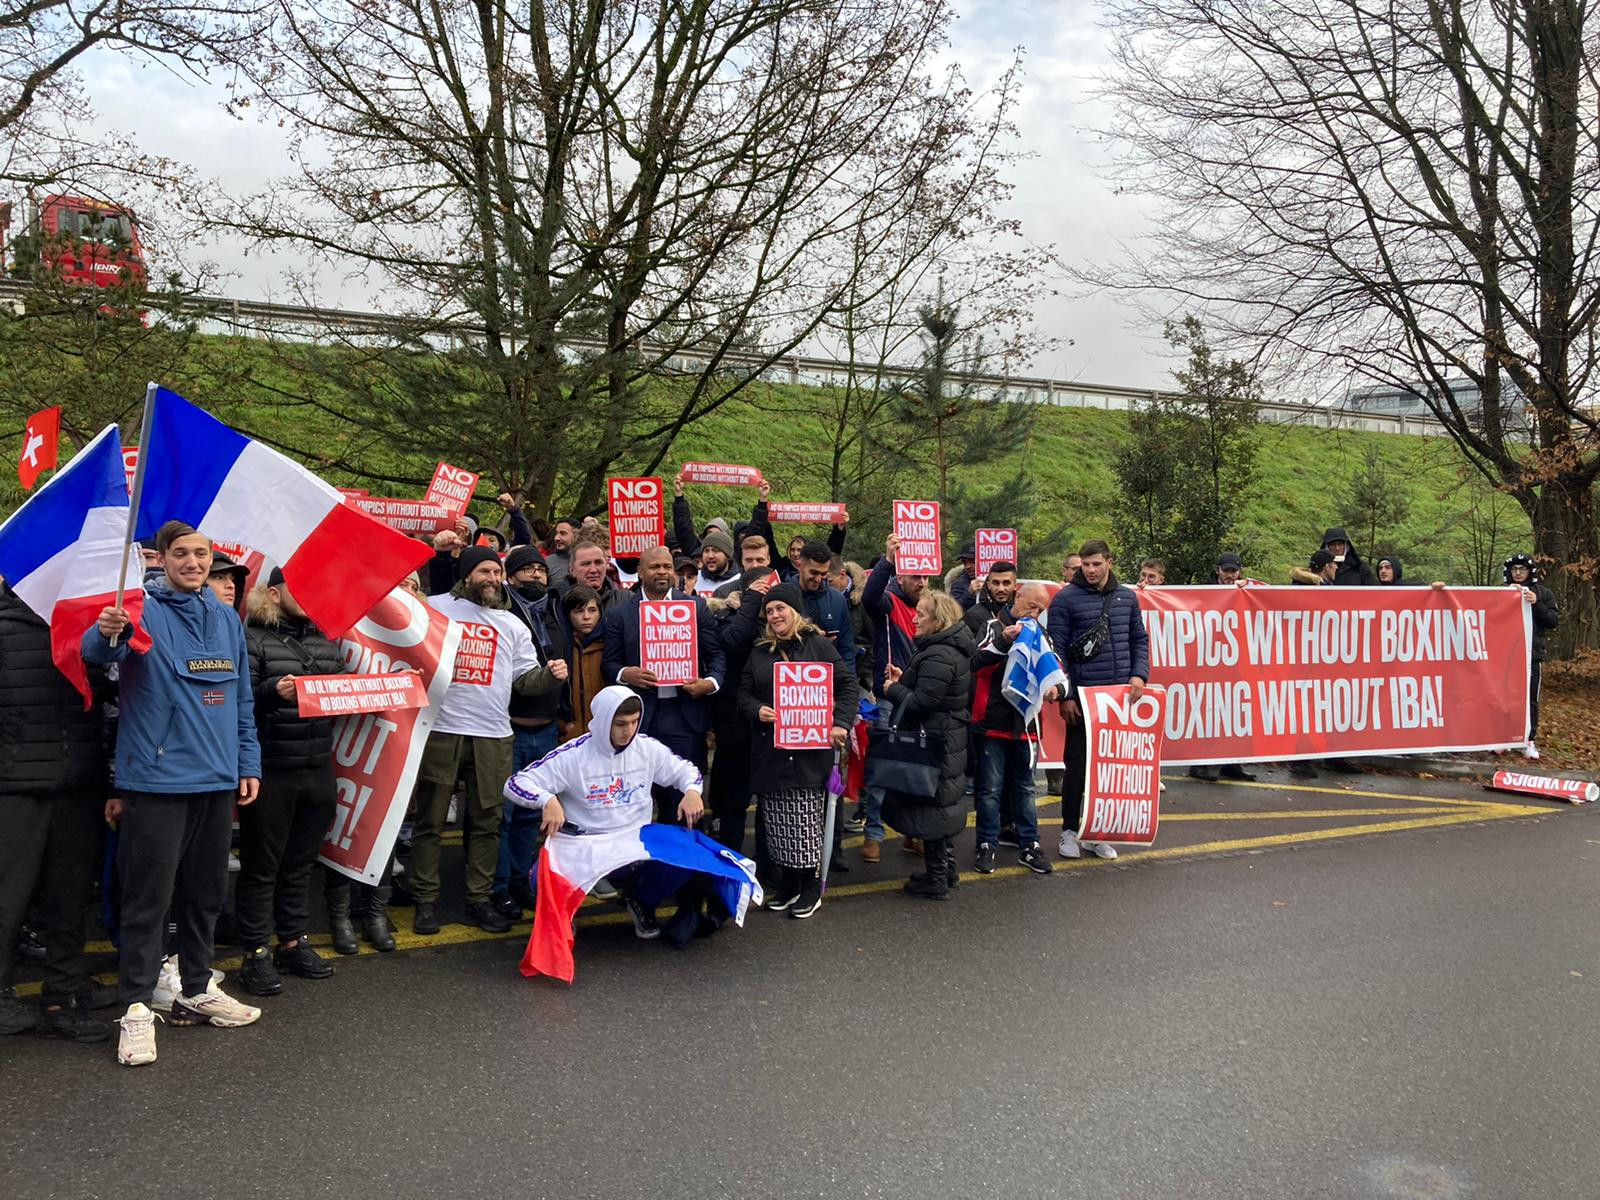 IBA supporters protest in Lausanne over exclusion of boxing from Olympics